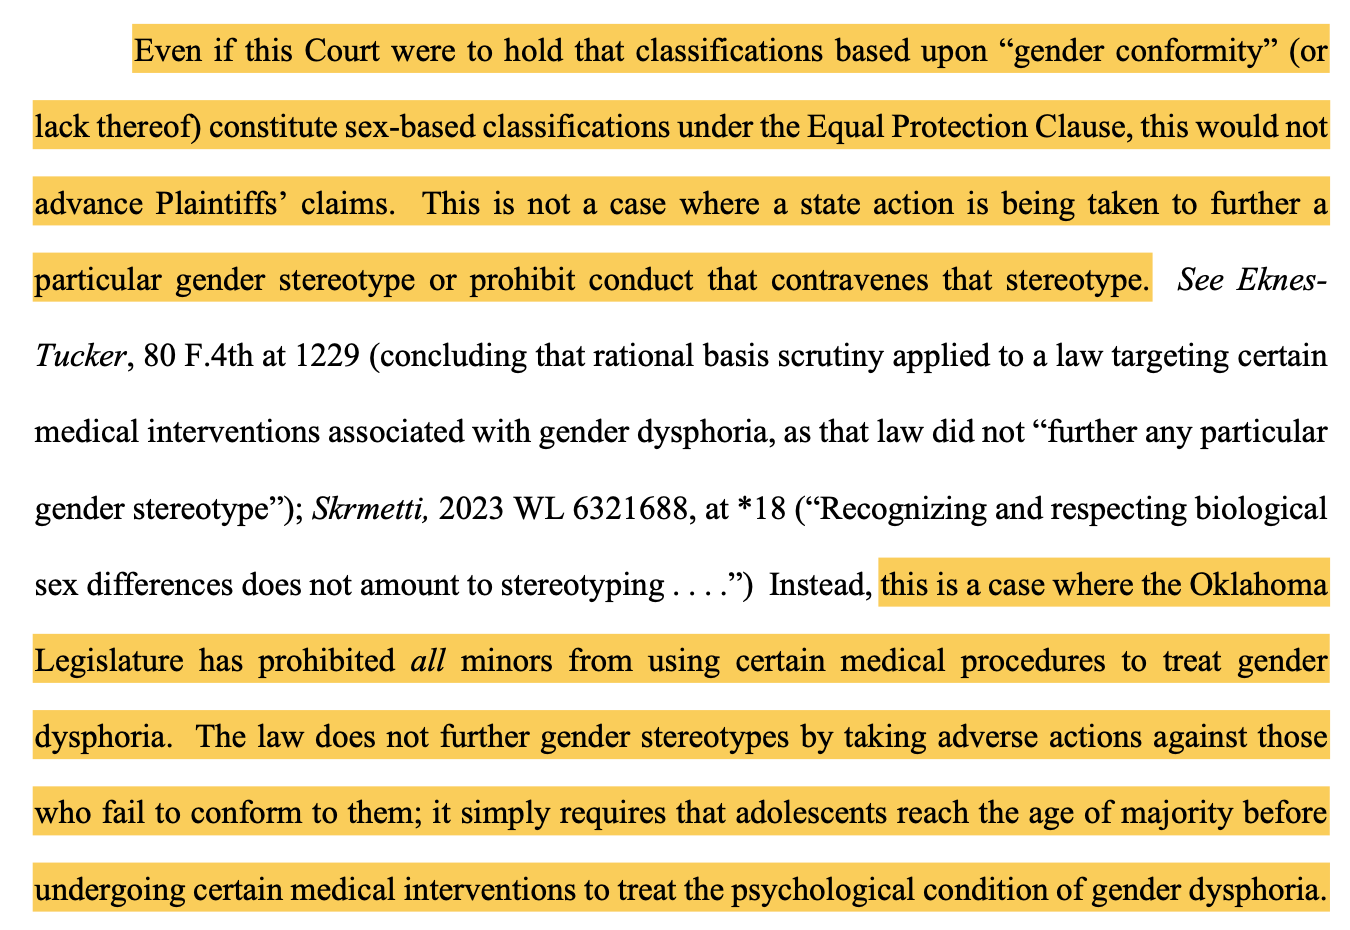 Even if this Court were to hold that classifications based upon “gender conformity” (or lack thereof) constitute sex-based classifications under the Equal Protection Clause, this would not advance Plaintiffs’ claims. This is not a case where a state action is being taken to further a particular gender stereotype or prohibit conduct that contravenes that stereotype. See Eknes- Tucker, 80 F.4th at 1229 (concluding that rational basis scrutiny applied to a law targeting certain medical interventions associated with gender dysphoria, as that law did not “further any particular gender stereotype”); Skrmetti, 2023 WL 6321688, at *18 (“Recognizing and respecting biological sex differences does not amount to stereotyping . . . .”) Instead, this is a case where the Oklahoma Legislature has prohibited all minors from using certain medical procedures to treat gender dysphoria. The law does not further gender stereotypes by taking adverse actions against those who fail to conform to them; it simply requires that adolescents reach the age of majority before undergoing certain medical interventions to treat the psychological condition of gender dysphoria.